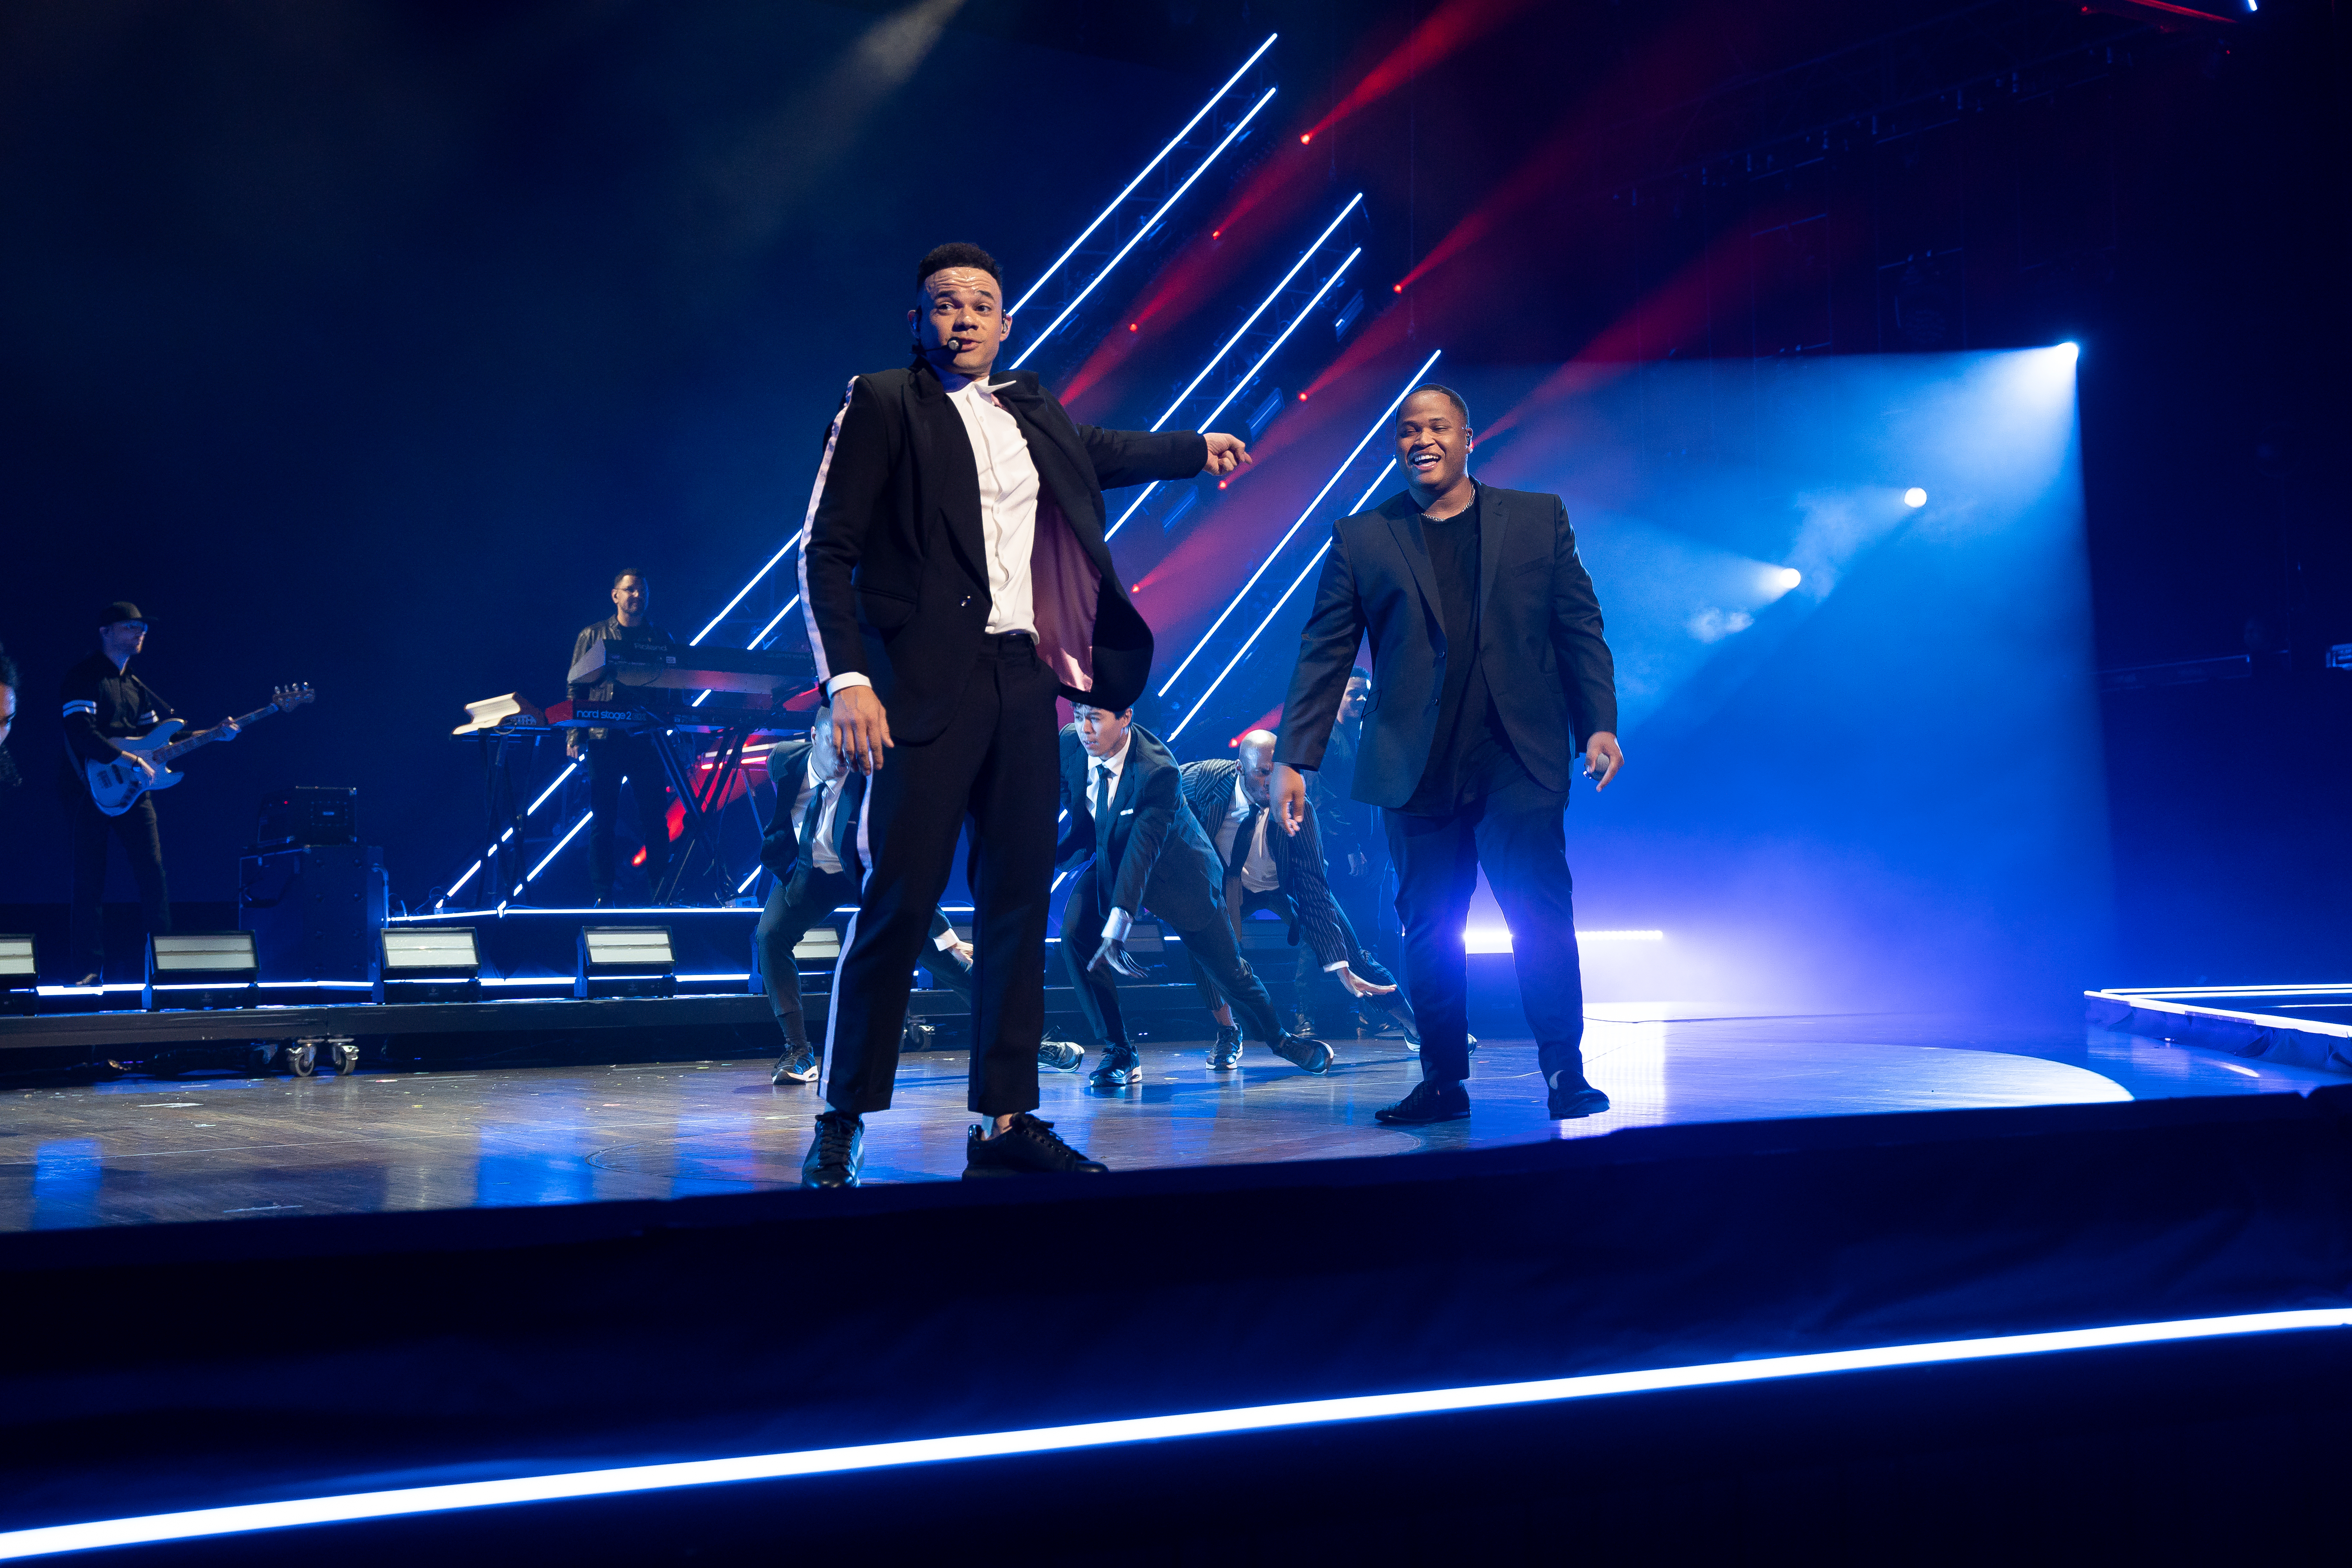 Tauren Wells and Aaron Cole Performing at the 2022 K-LOVE Fan Awards